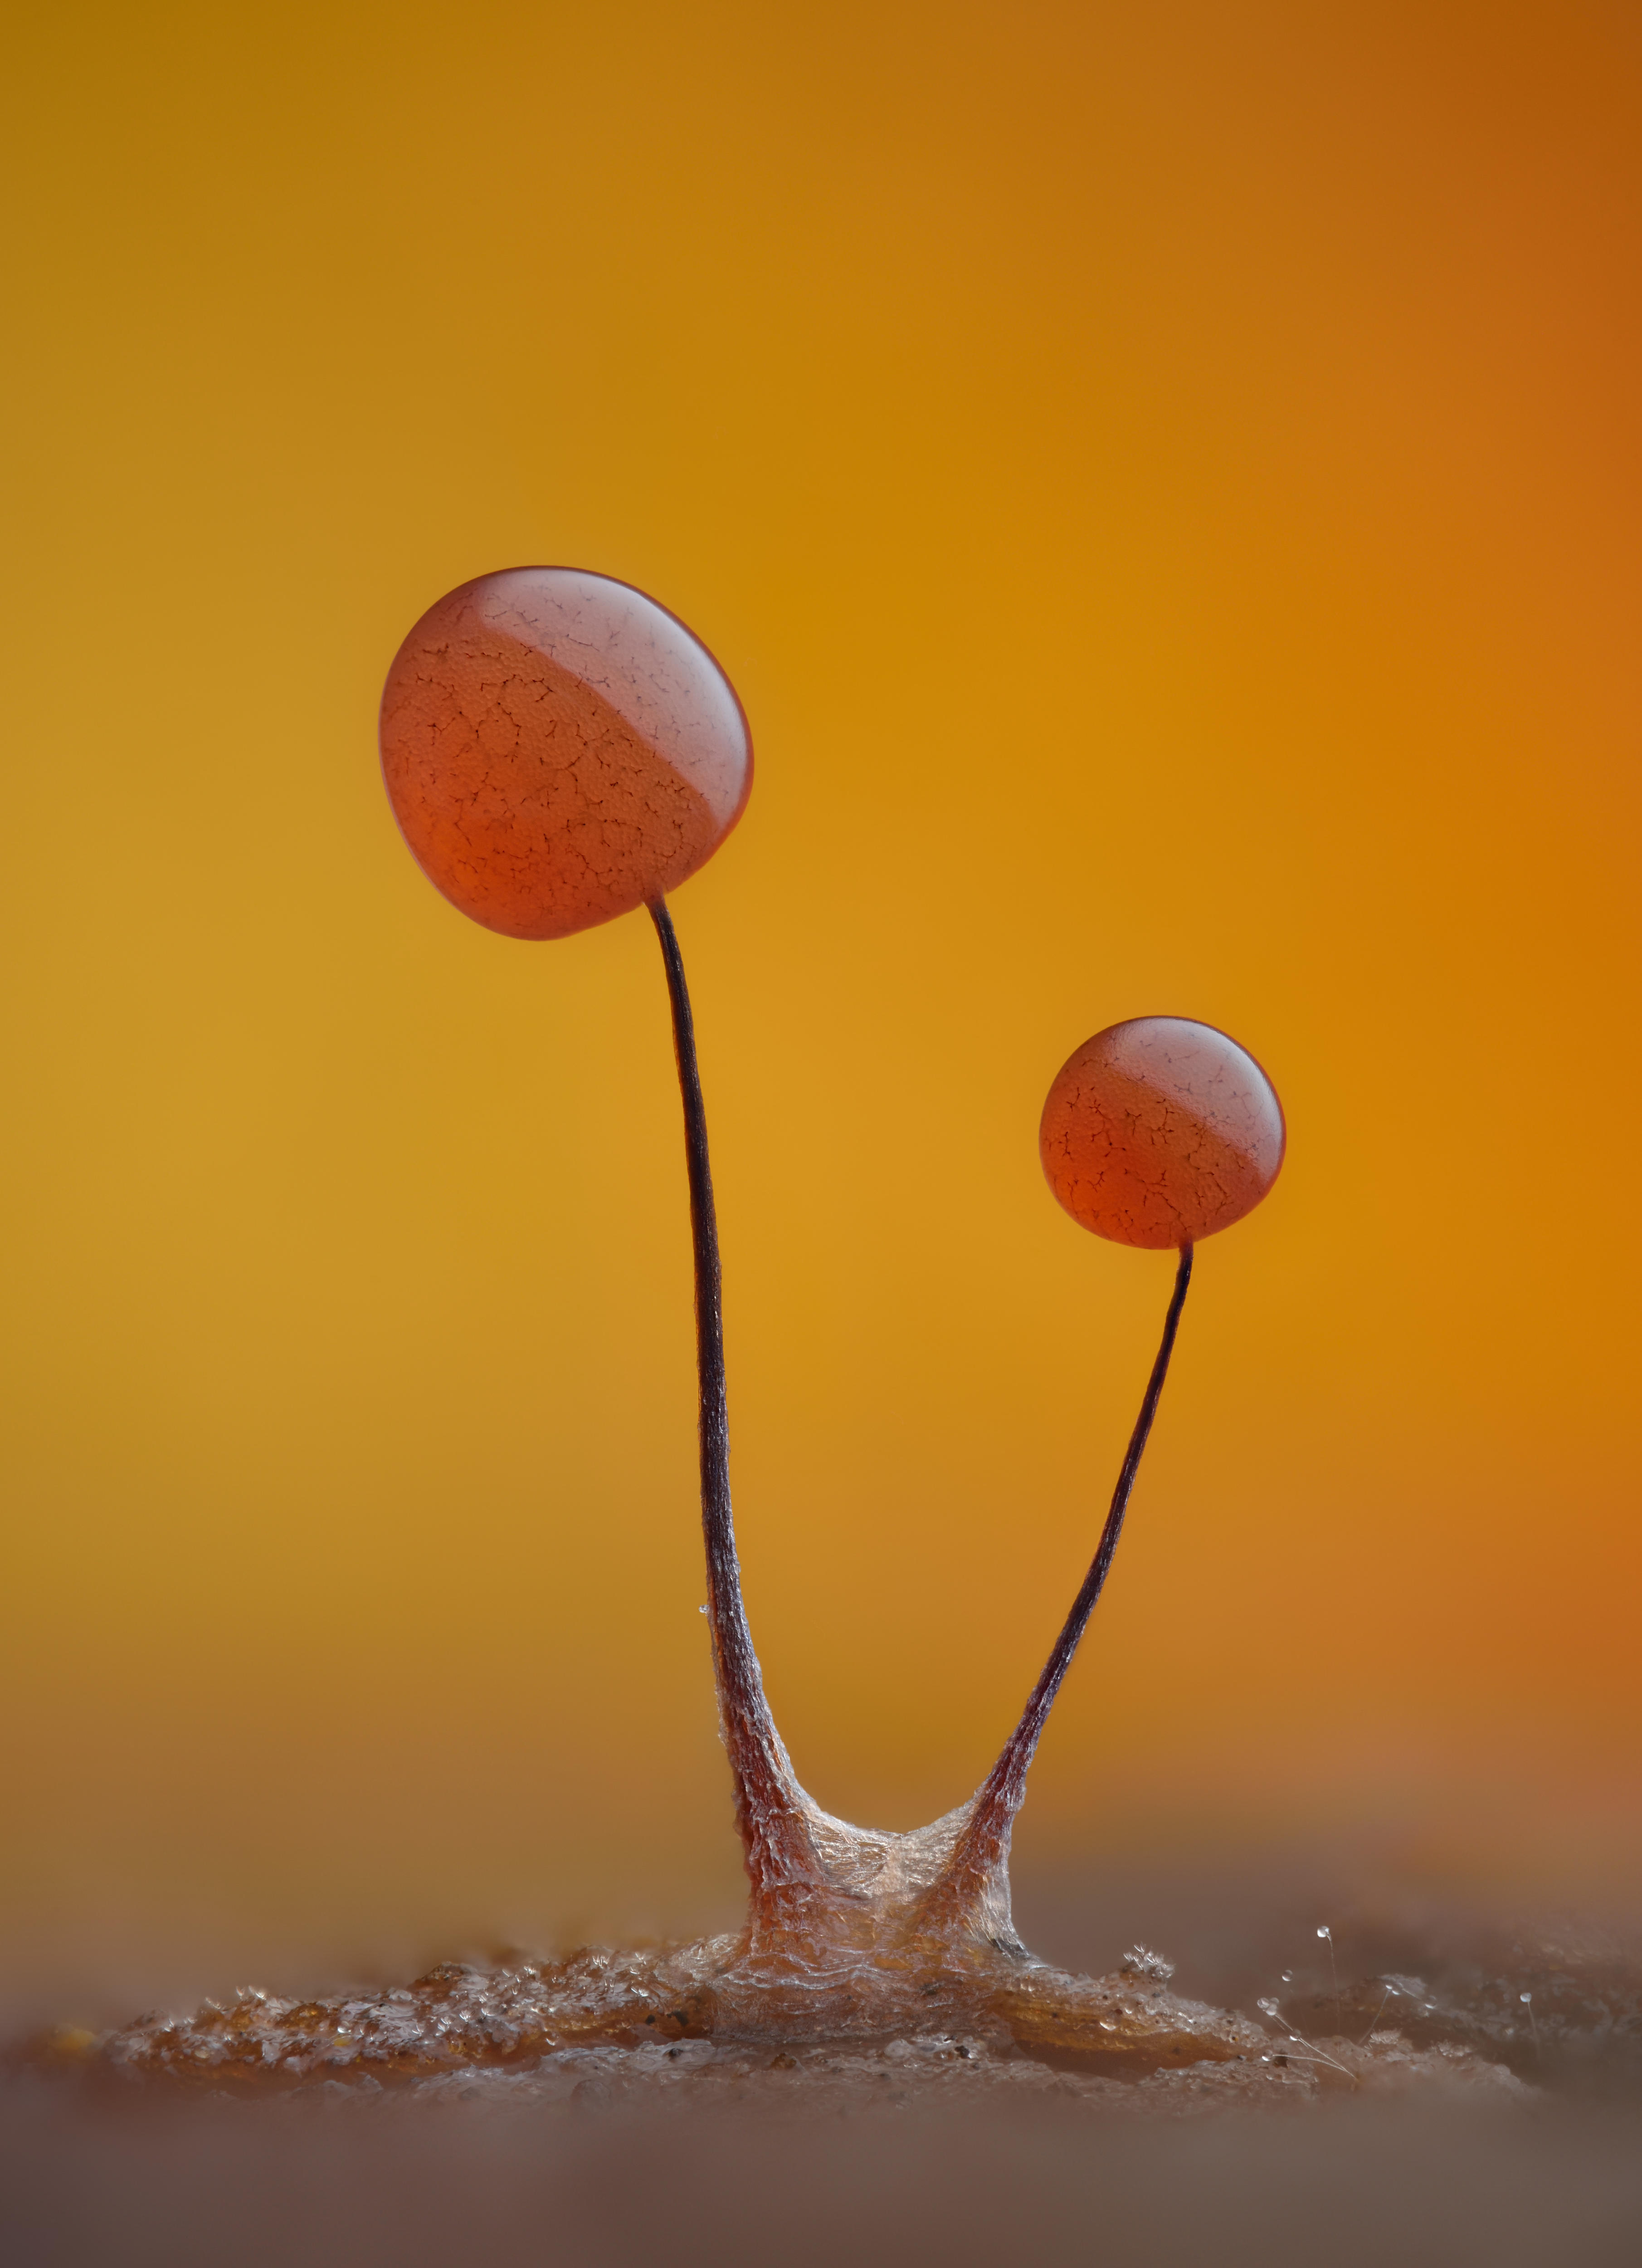 Yellow background with two dark stems coming off the ground with a red ball on top